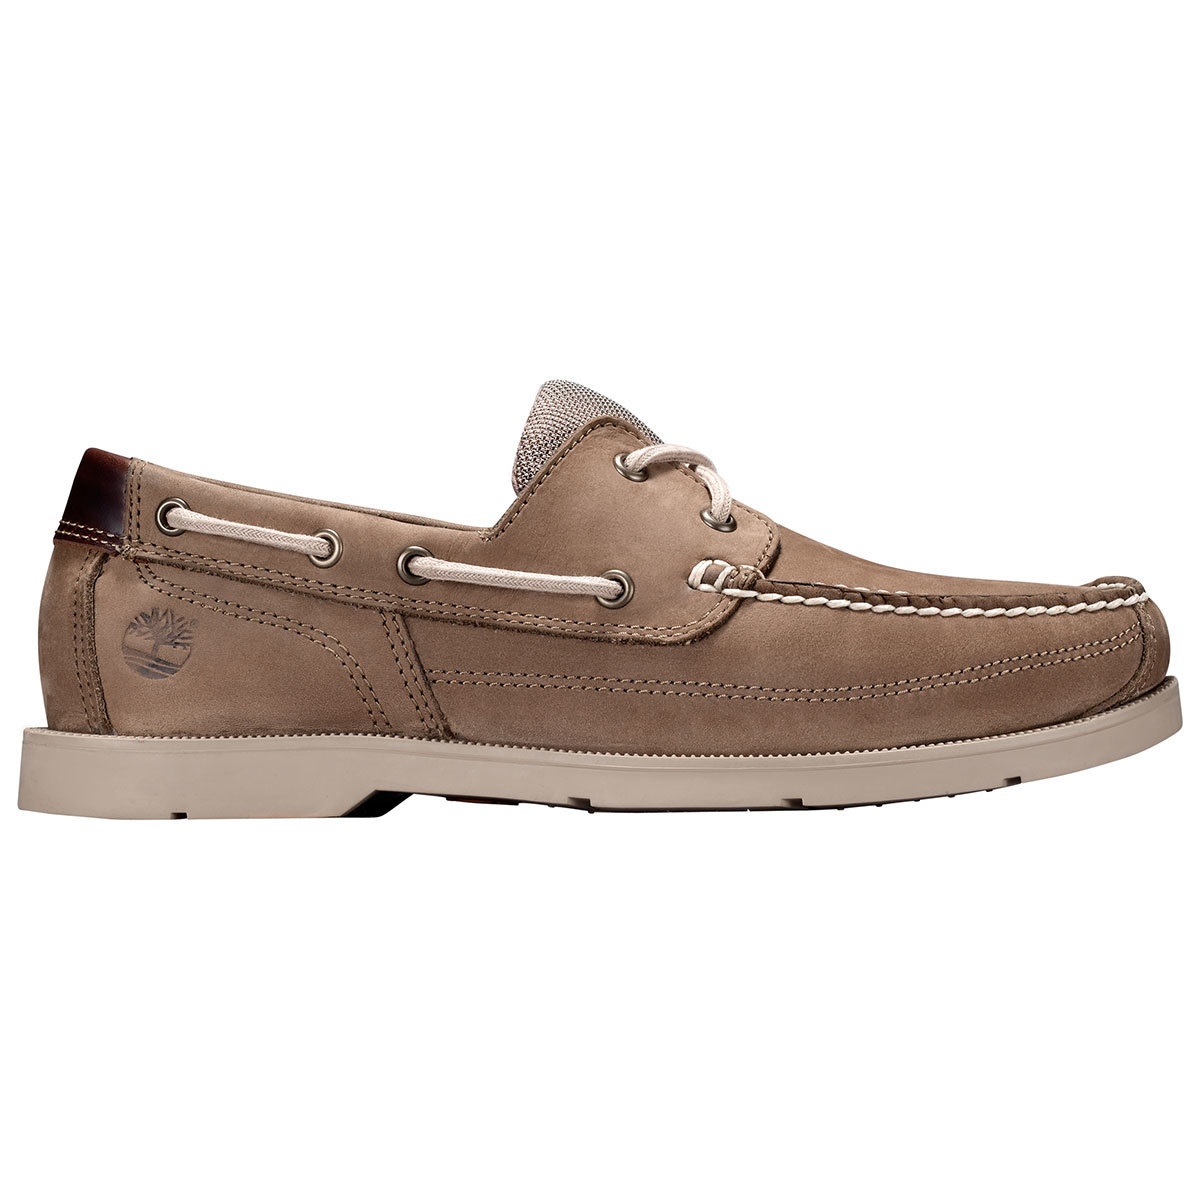 TIMBERLAND Men's Piper Cove Boat Shoes 